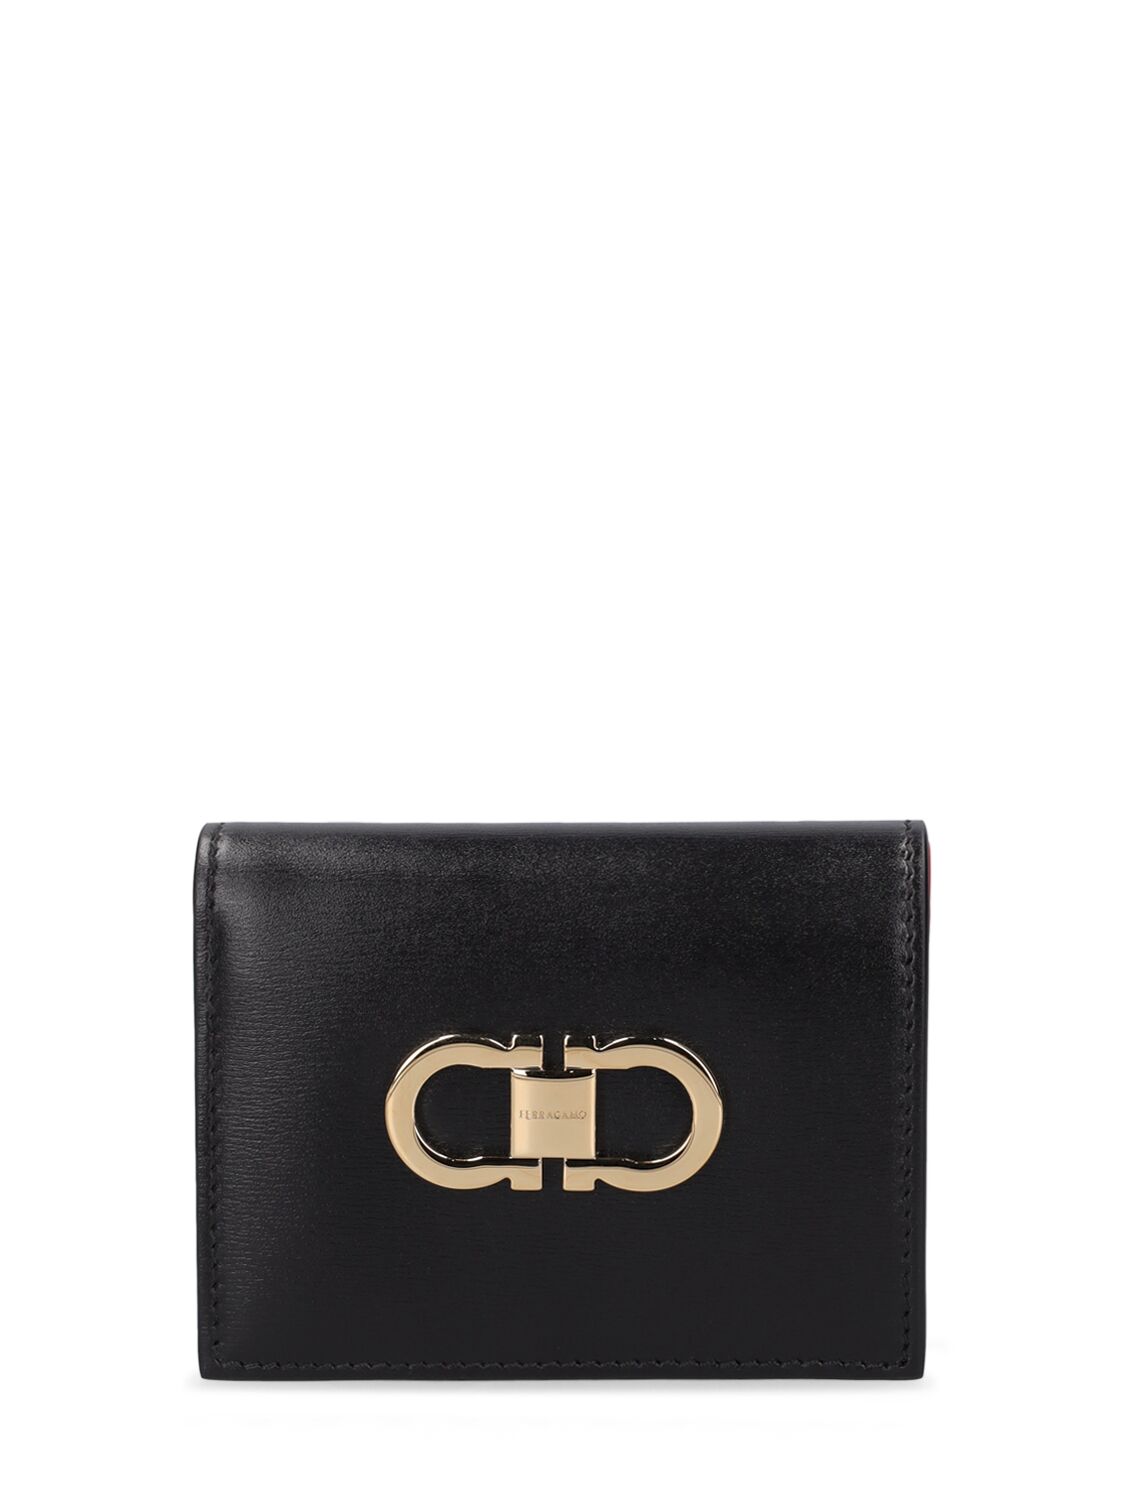 Image of Compact Leather Wallet